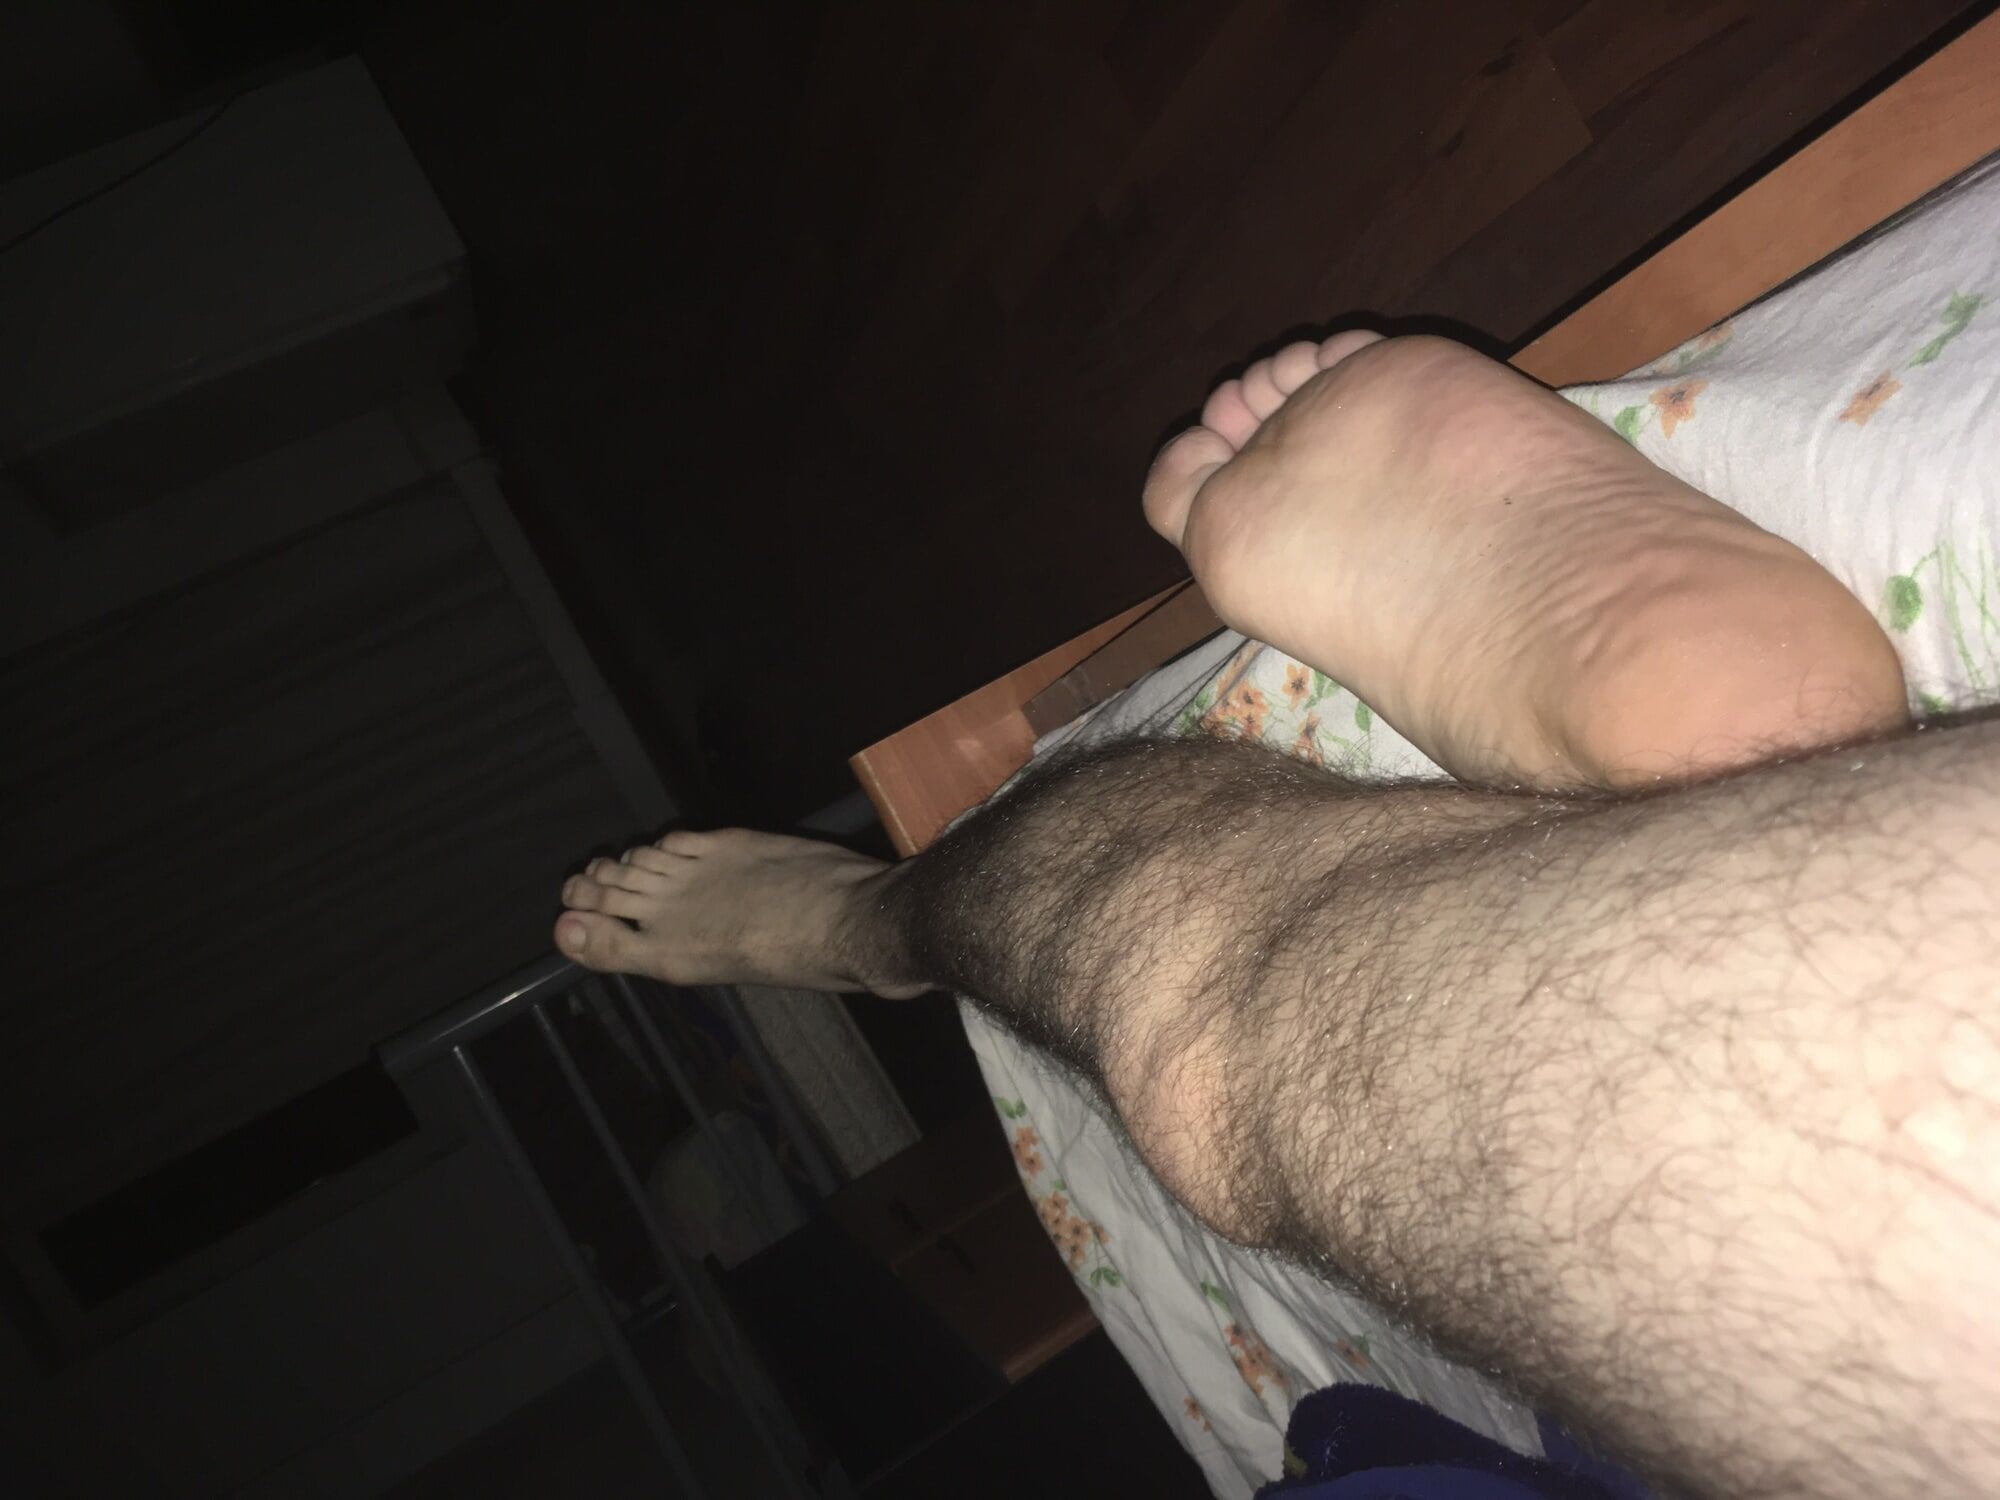 My foreskin dick and feet. #2